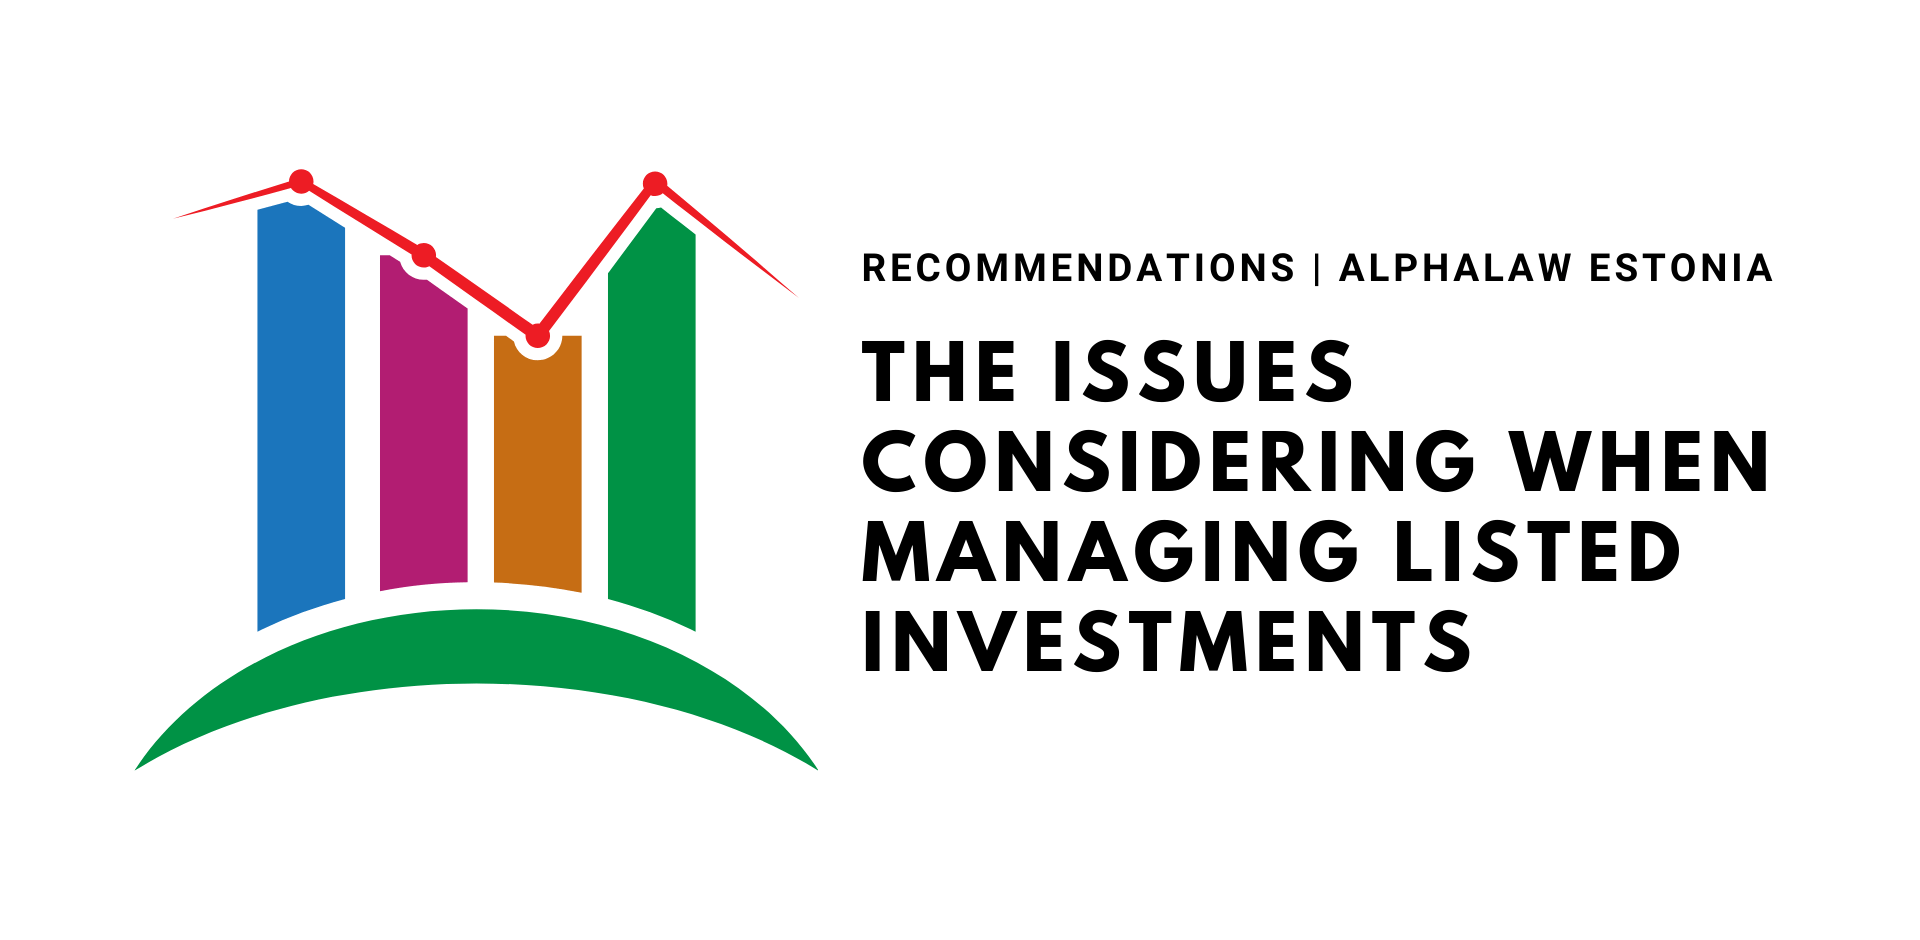 The Issues Considering when Managing Listed Investments